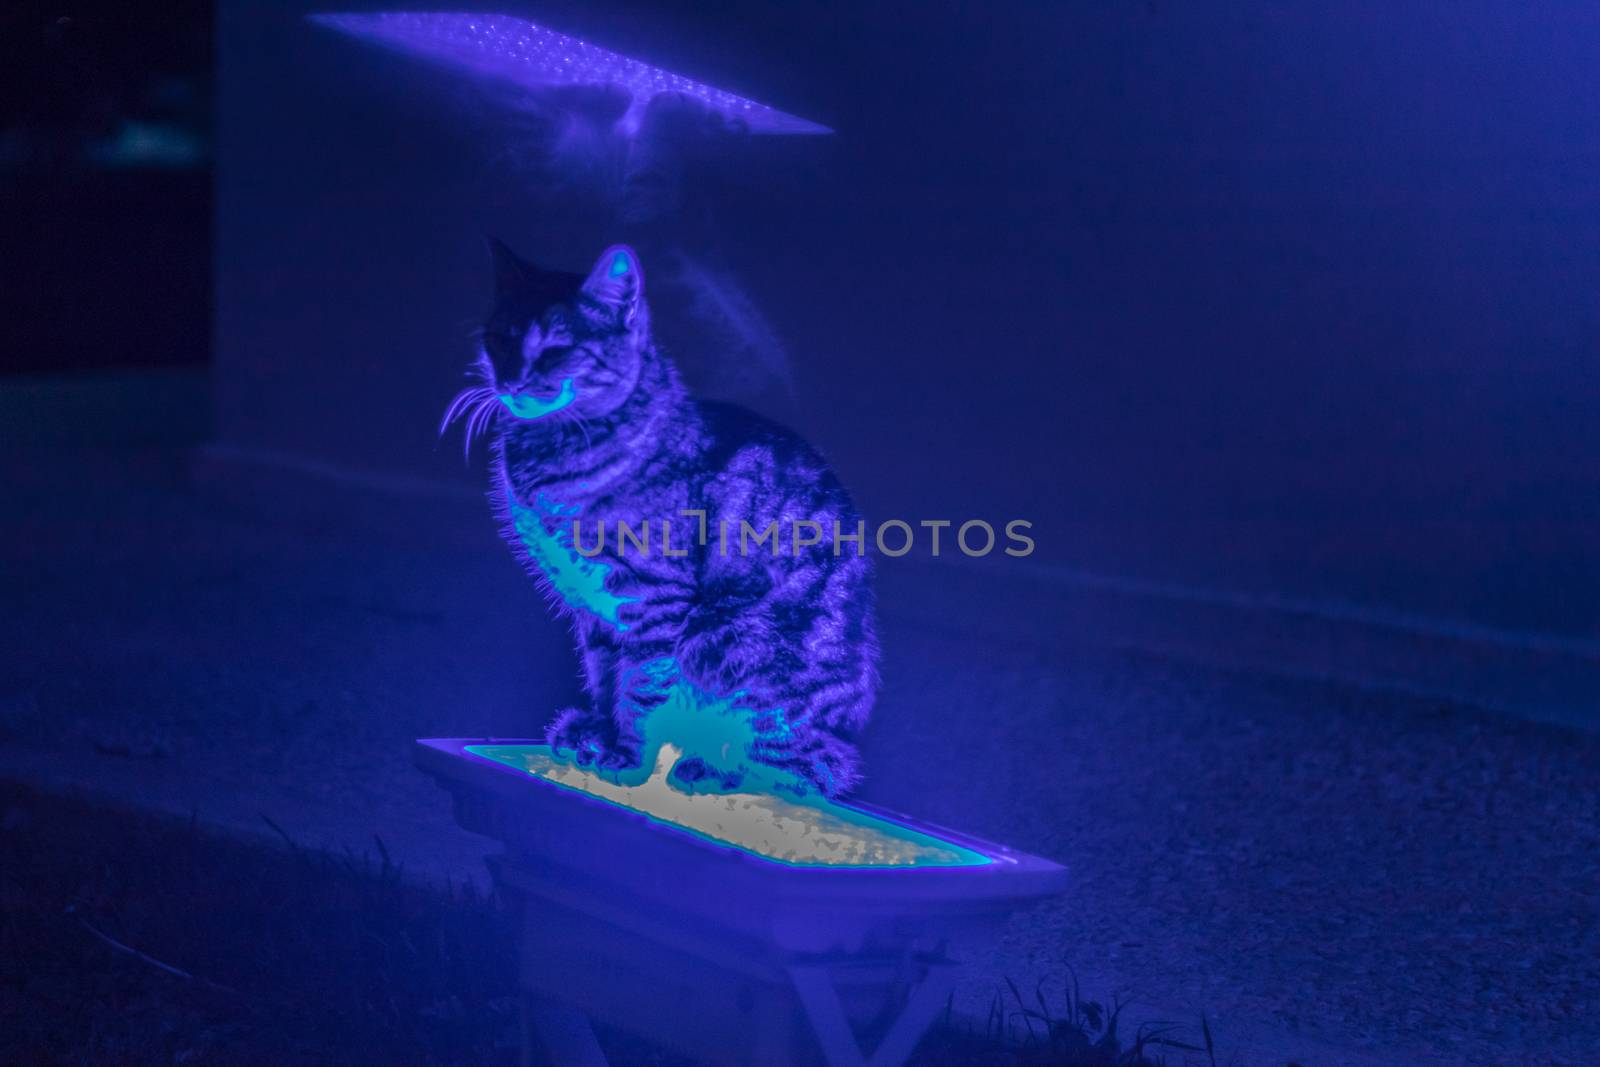 a cat sitting on blue neon light - highlights off. looks like xray.